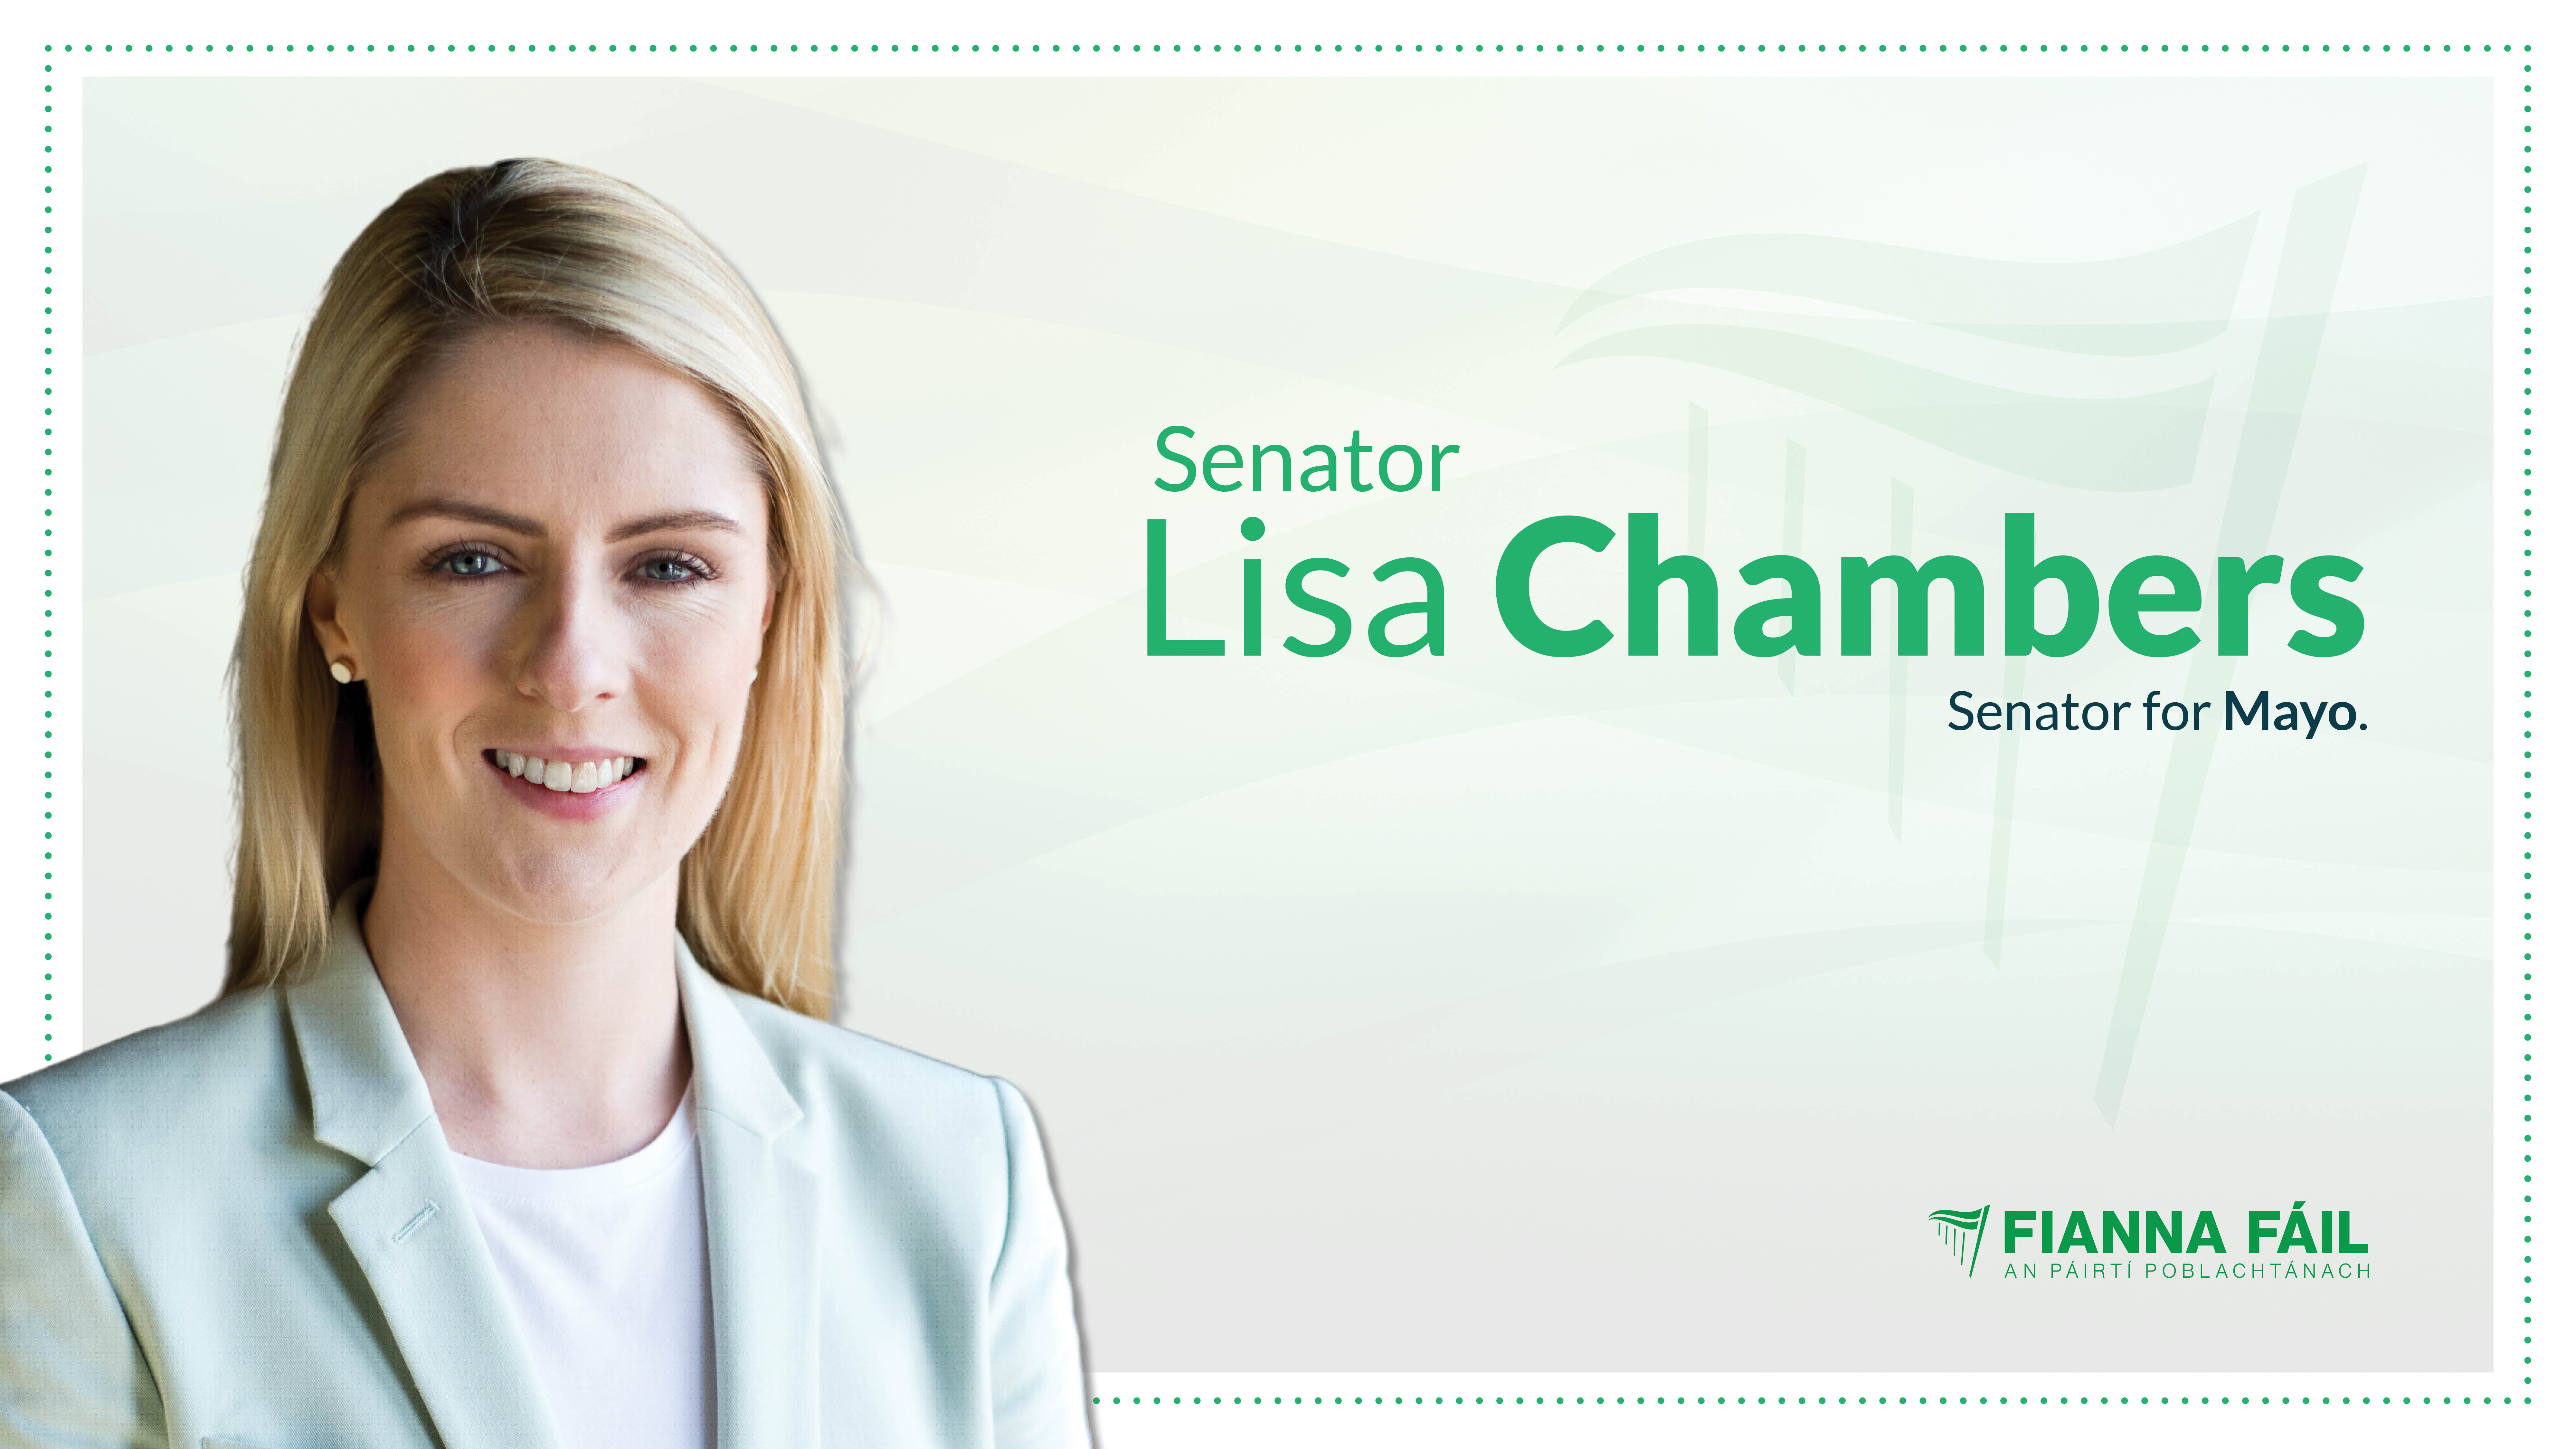 West of Ireland must not be discriminated against in High-Level Offshore Wind Phase 2 Policy Statement - Senator Lisa Chambers